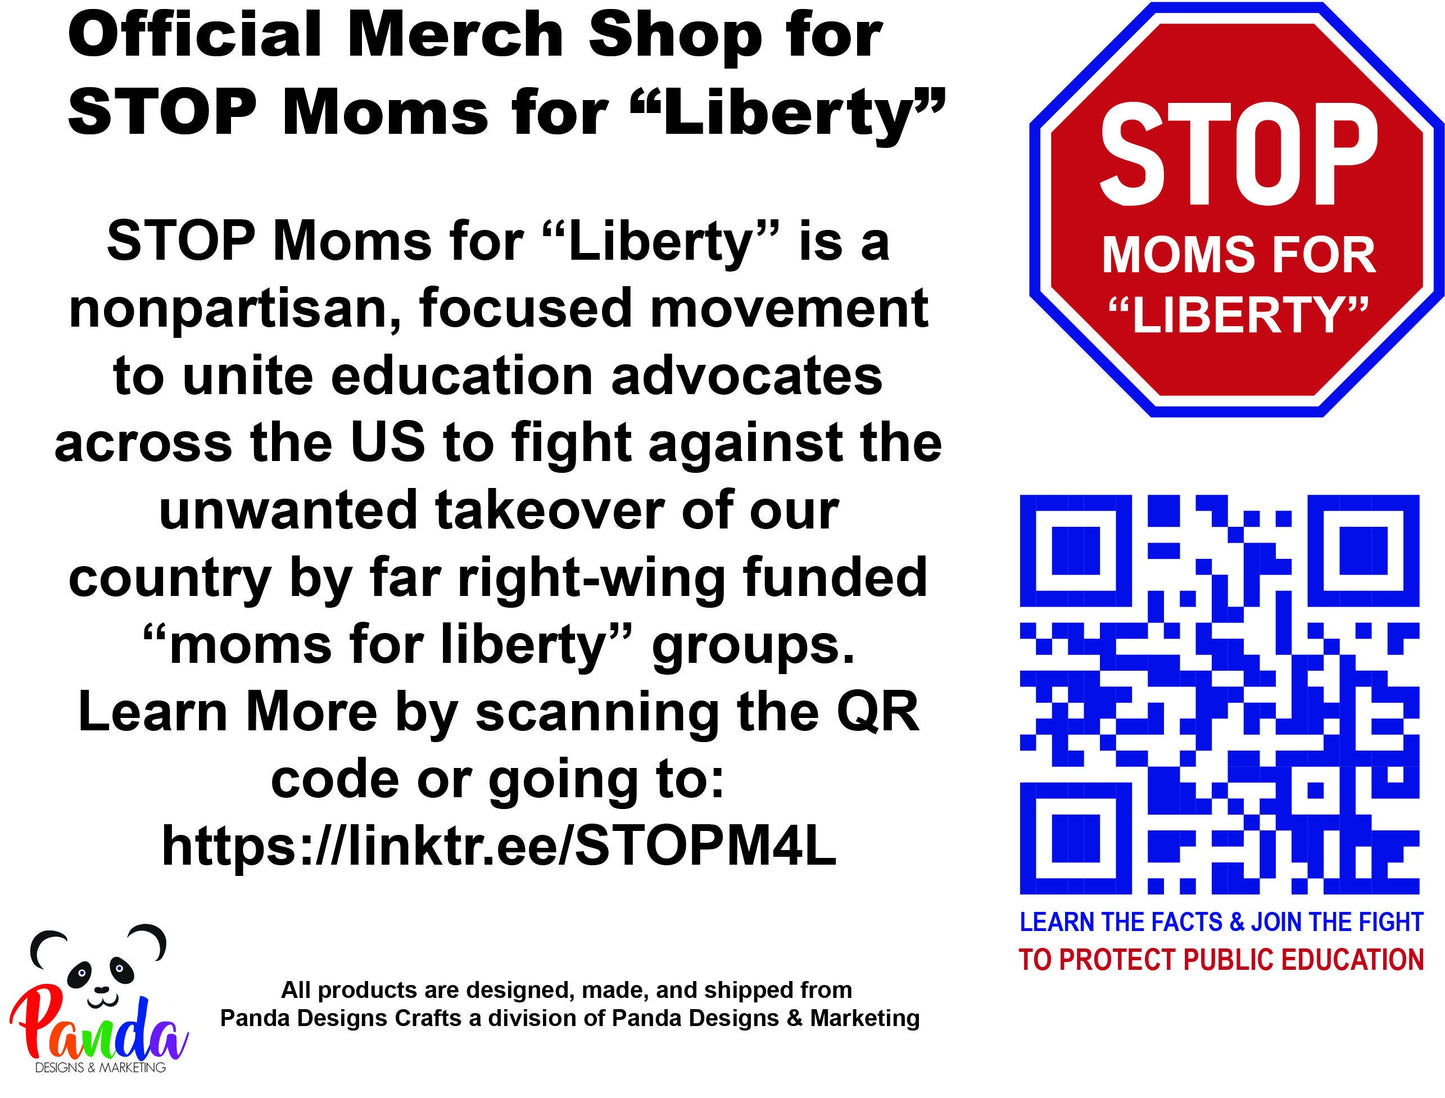 STOP Moms for "Liberty" Tote Bag with QR Code.